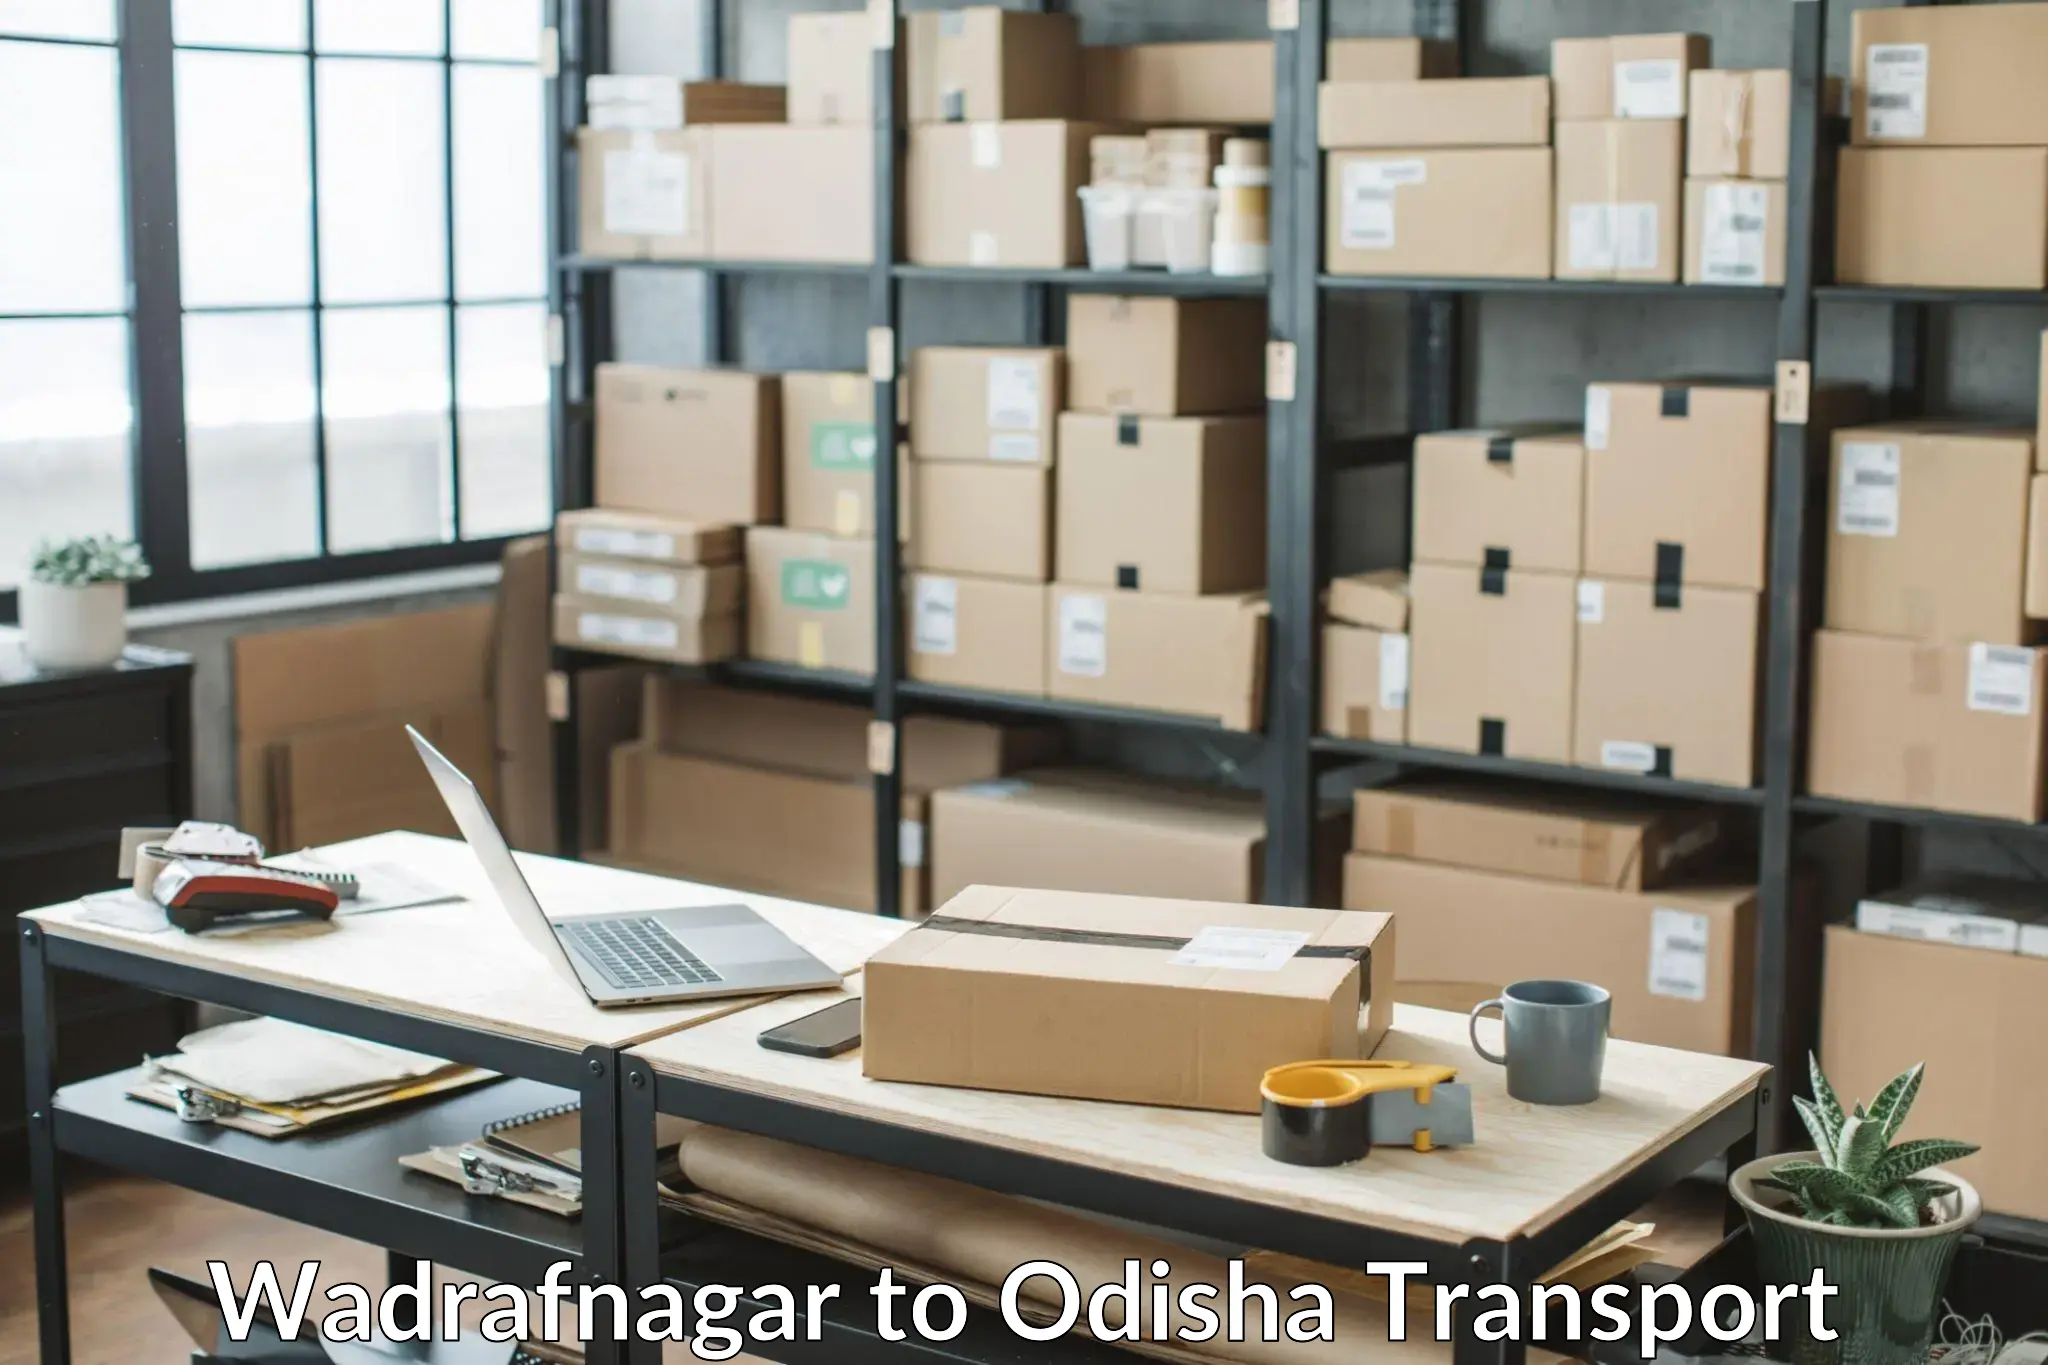 Package delivery services Wadrafnagar to Tihidi